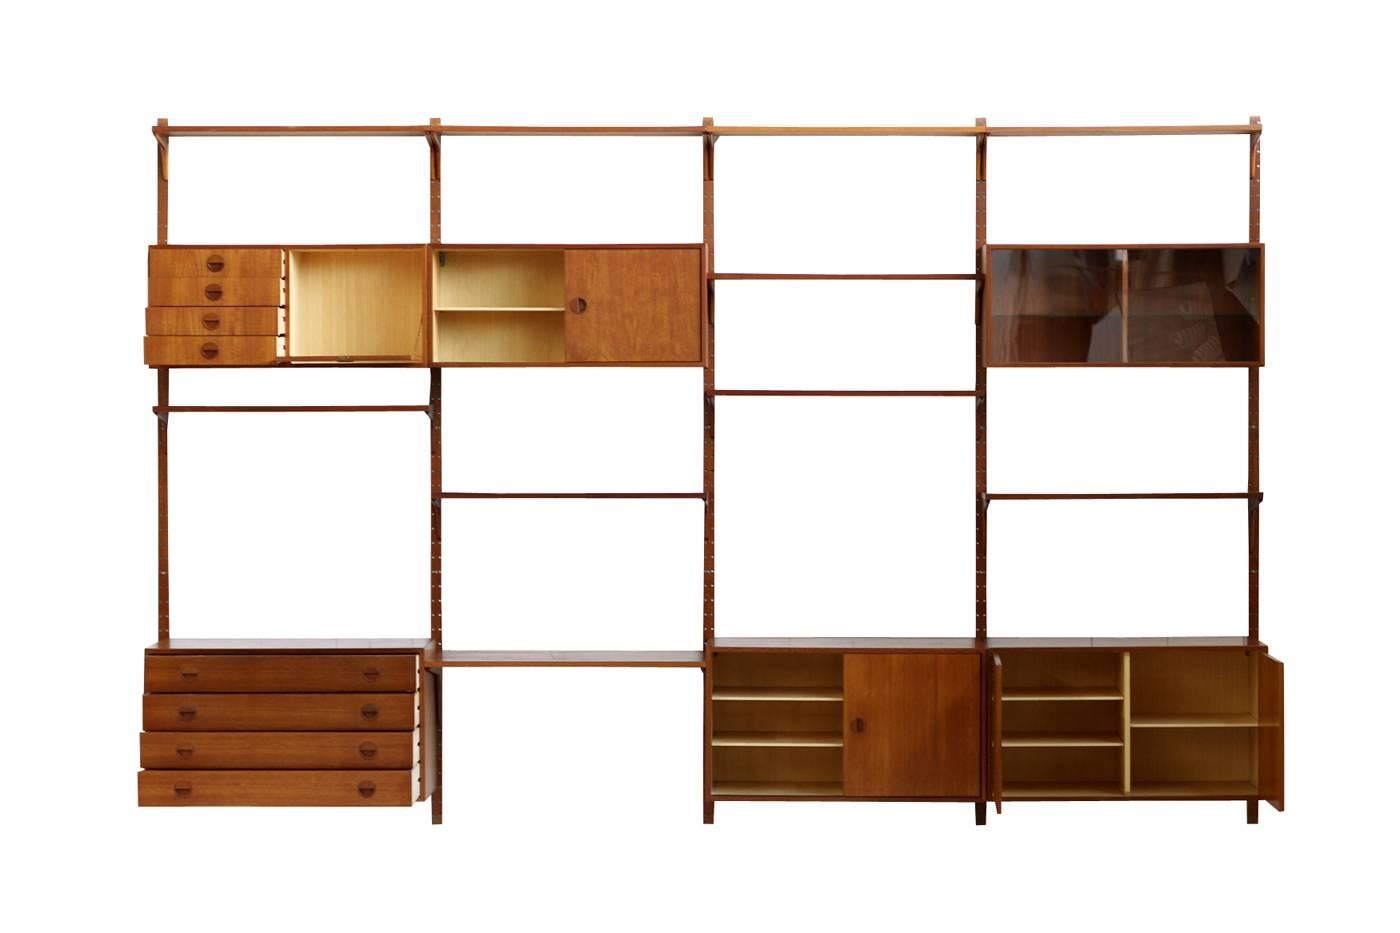 Beautiful 1960s Teak wall unit, mudular system, by Rud Thygesen and Johnny Sorensen for HG Mobler, Made in Denmark.
Measures: W x D x H ca. 360 x 42 x 235cm
Very good condition, fully modular system.
Three cabinets W x D x H ca. 89 x 40 x